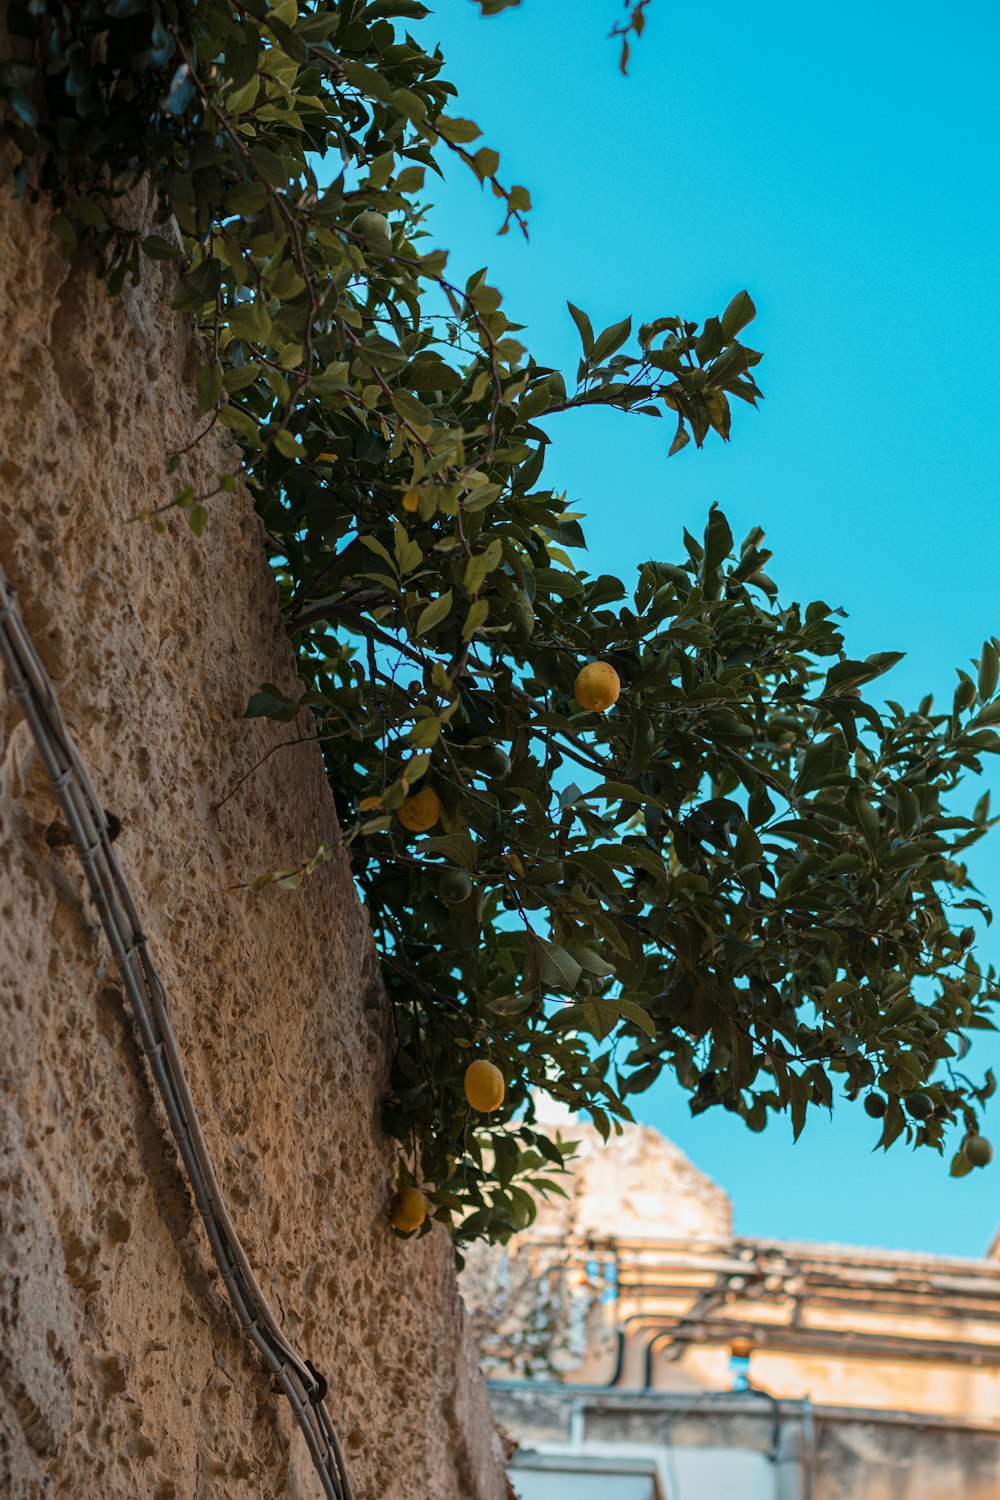 a tree with fruit growing on it